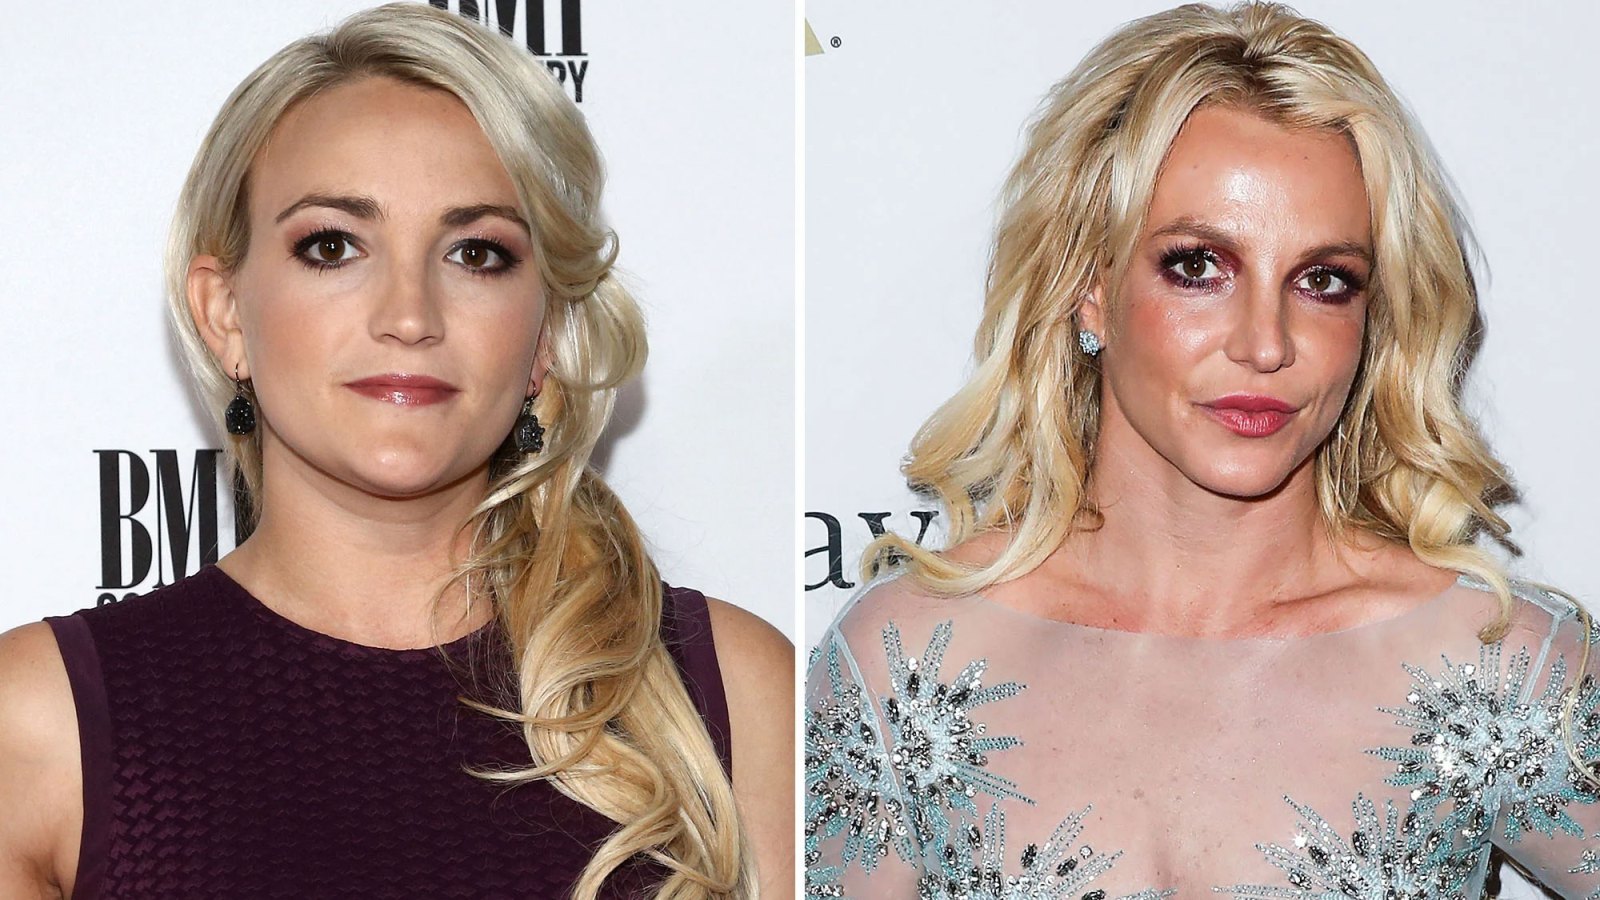 Jamie Lynn Spears Shows Support for Britney Spears Following Her Pregnancy Announcement